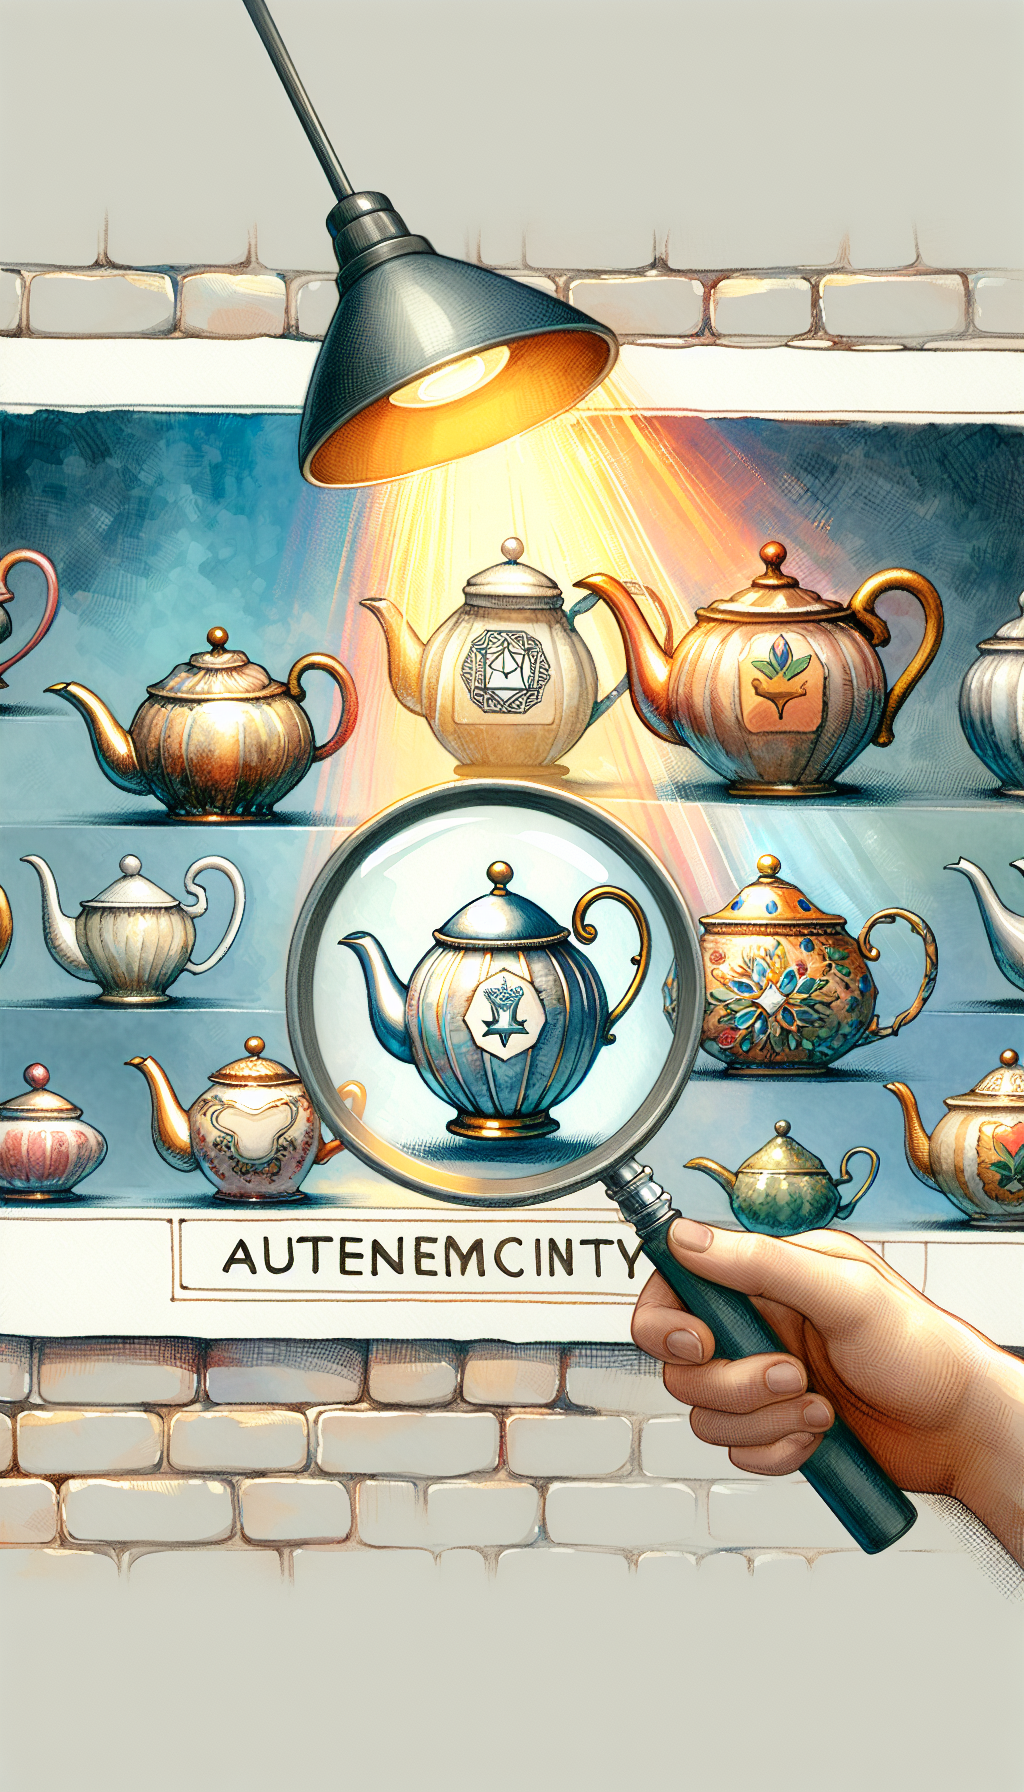 An intricate, whimsical illustration depicts a magnifying glass hovering over a collection of ornate teapots, each spotlighted with a beam that transforms into an authenticity certificate or hallmark symbol. Varied strokes and watercolor shades hint at the diversity of styles and eras, while subtle glimmers on the pots' surfaces evoke the high value of authentic antique teapots.